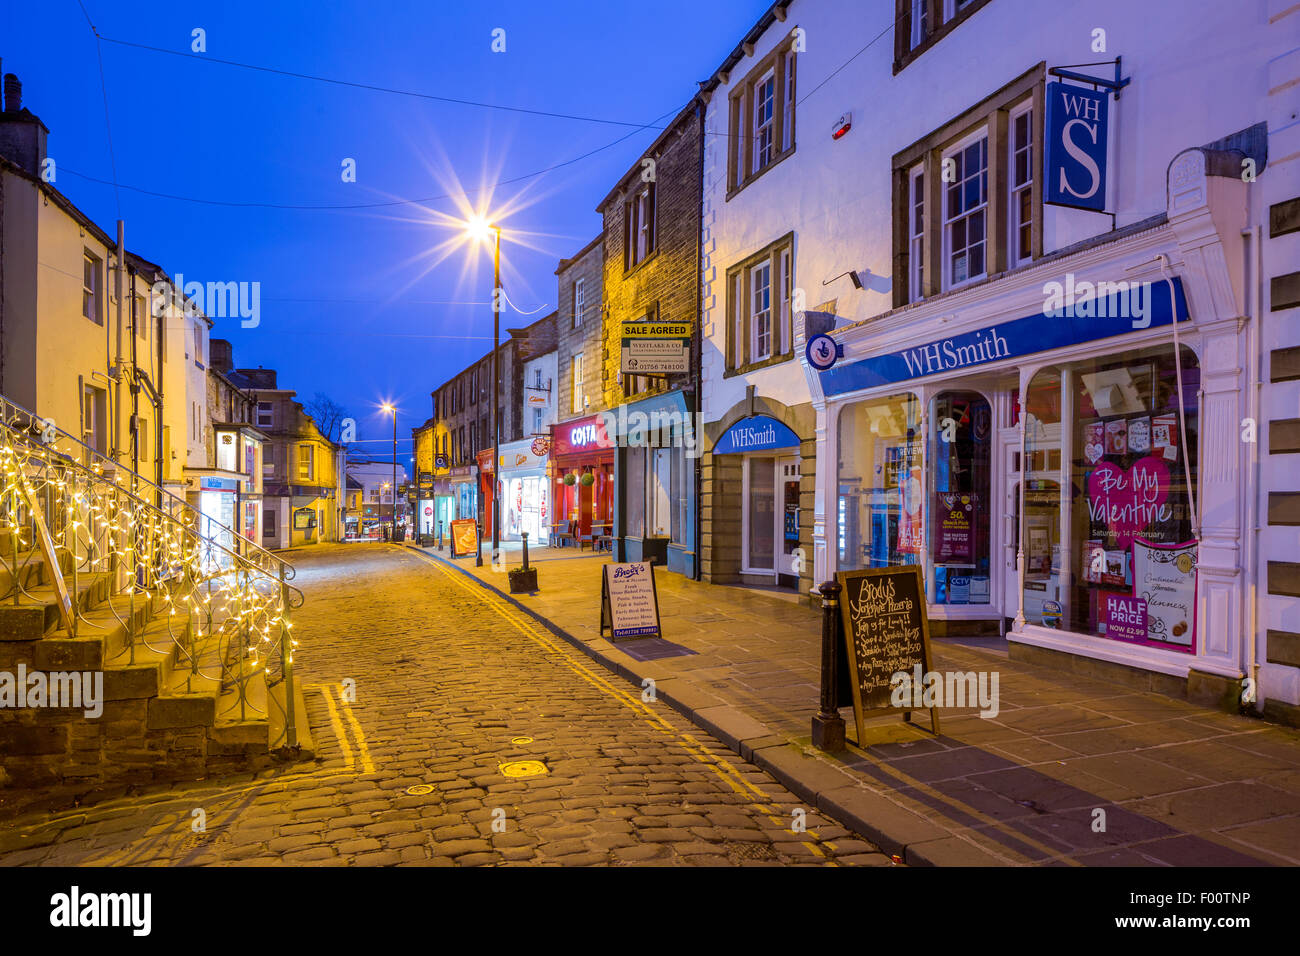 Skipton, a market town and civil parish in the Craven district of North Yorkshire, England, United Kingdom, Europe. Stock Photo